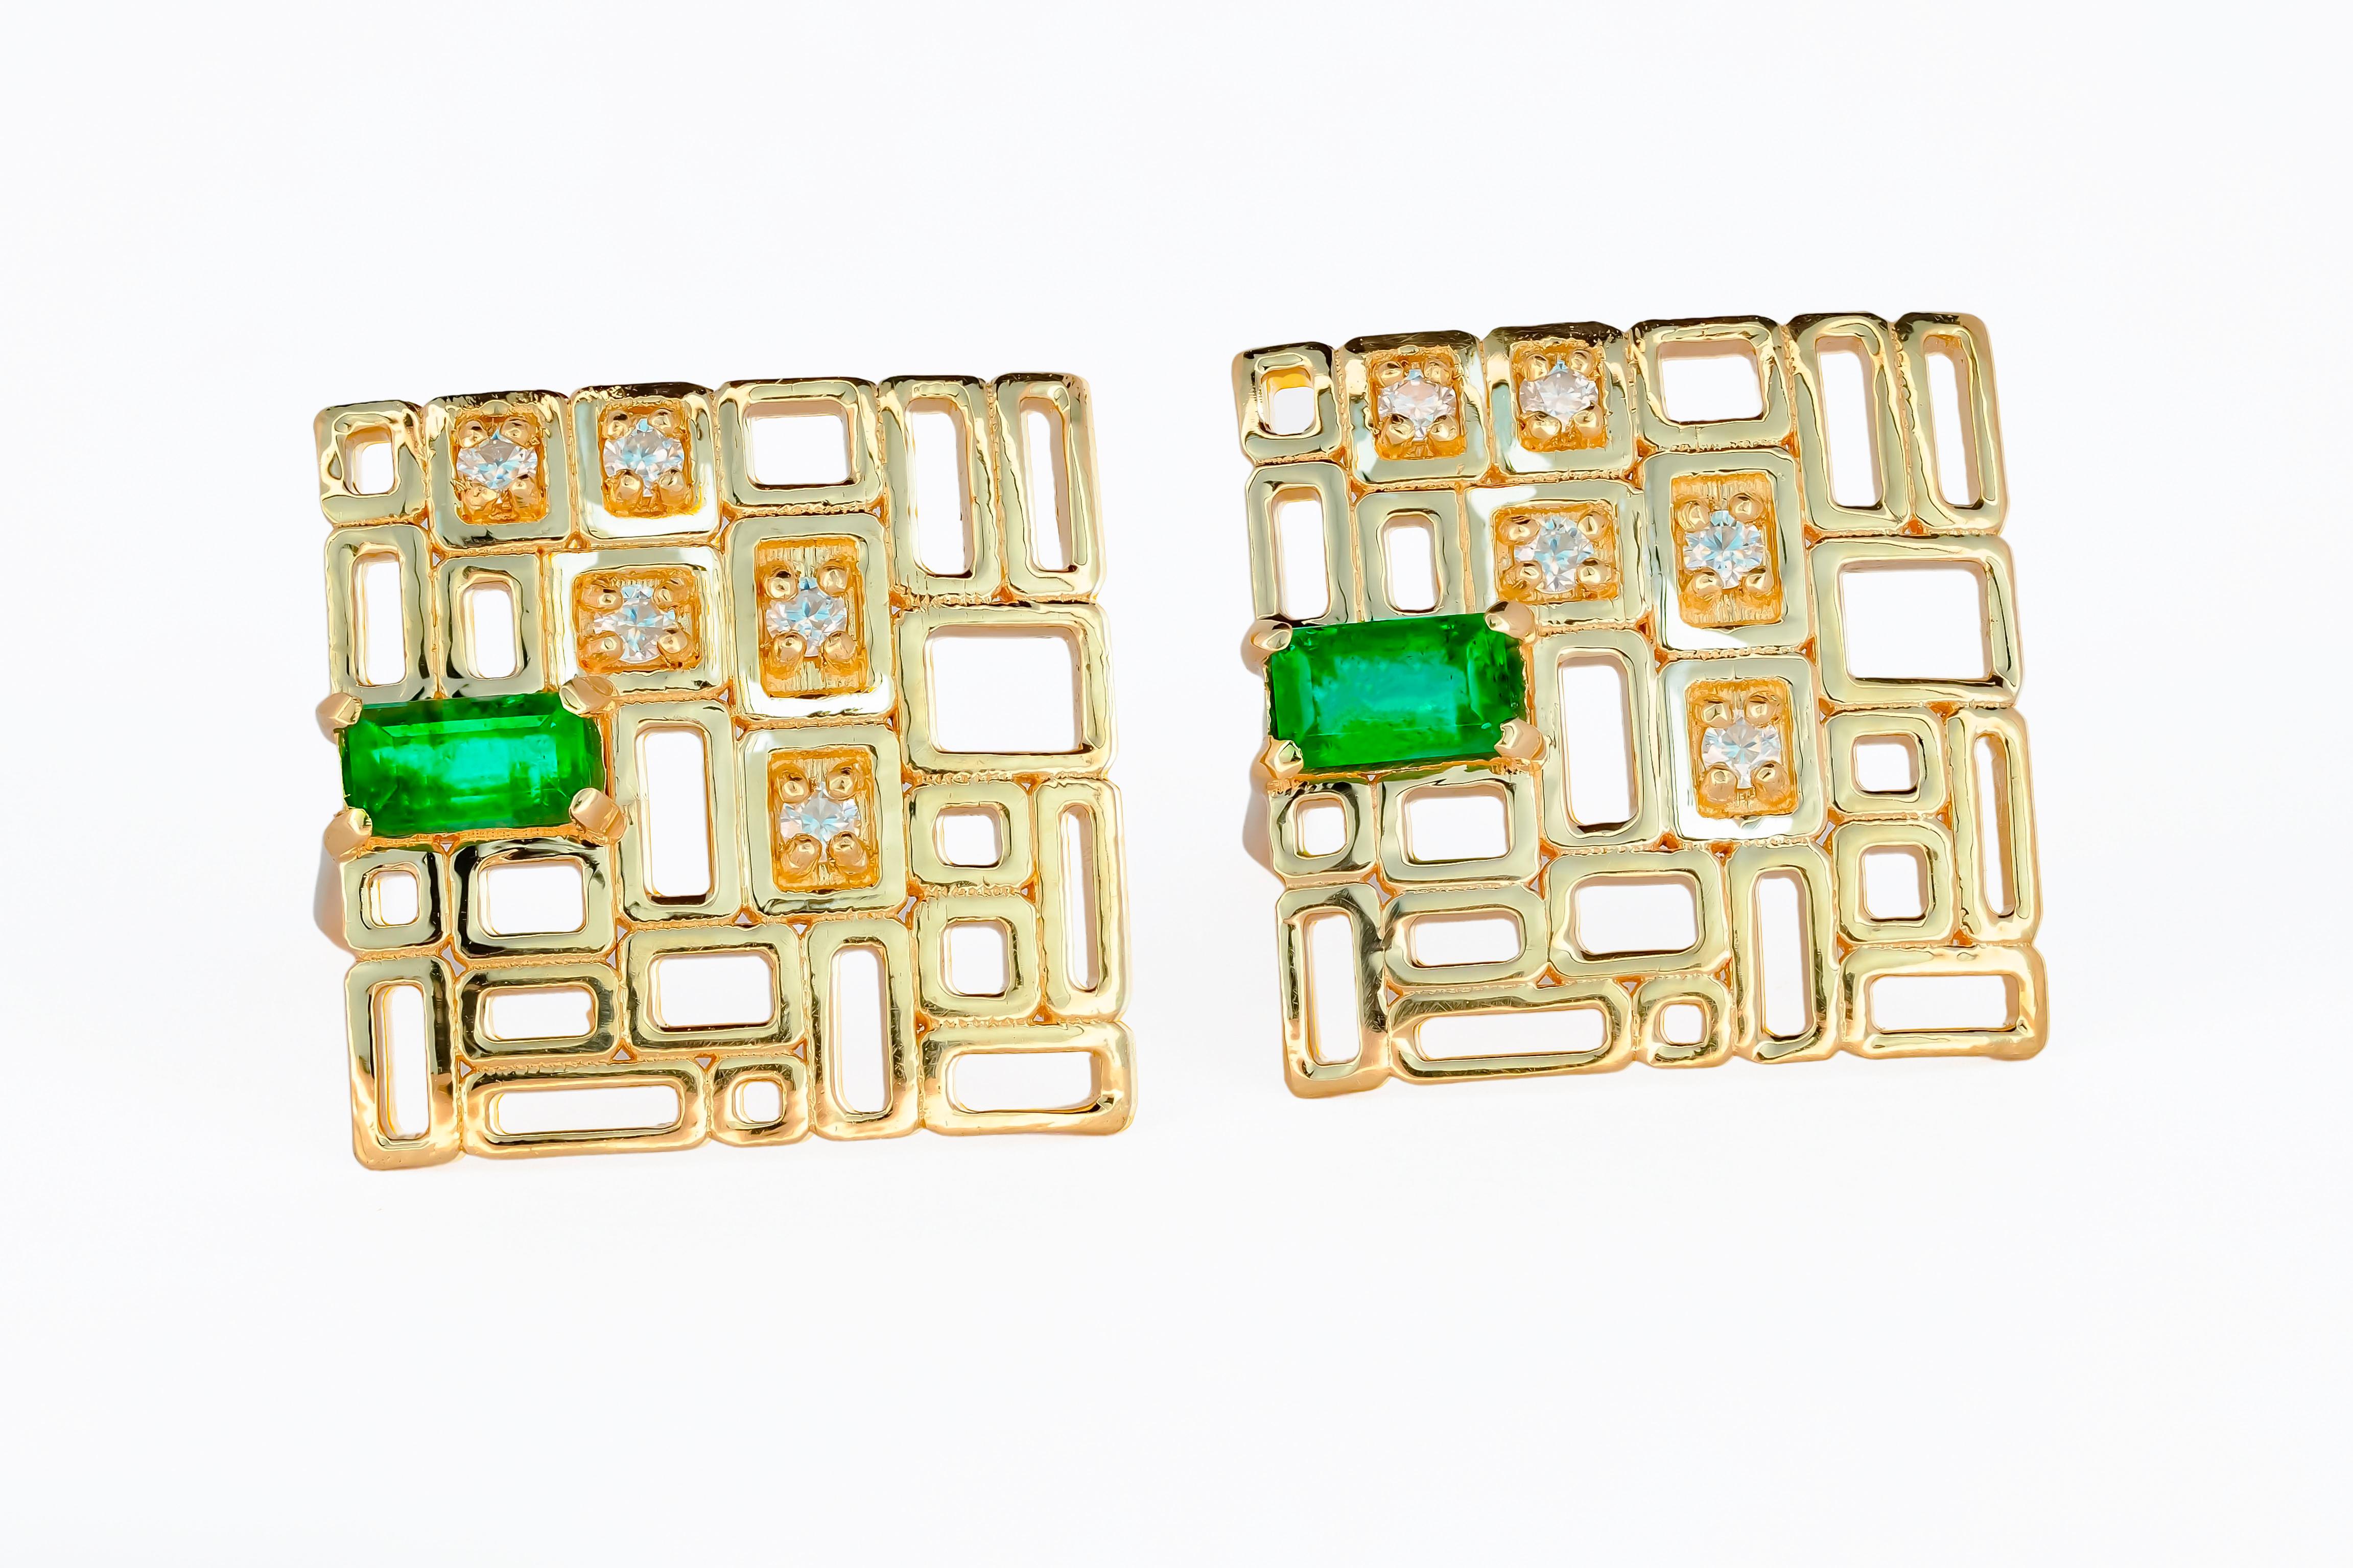 14 karat gold earrings studs with genuine emeralds and diamonds. May birthstone.
Metal: 14 karat gold
Weight: 2.2 g.
Size: 12.20 x 12 mm.
Central stone: 
2 genuine emeralds: weight - 0.15 ct + 0.15 ct = total 0.30 ct, both has a rich green